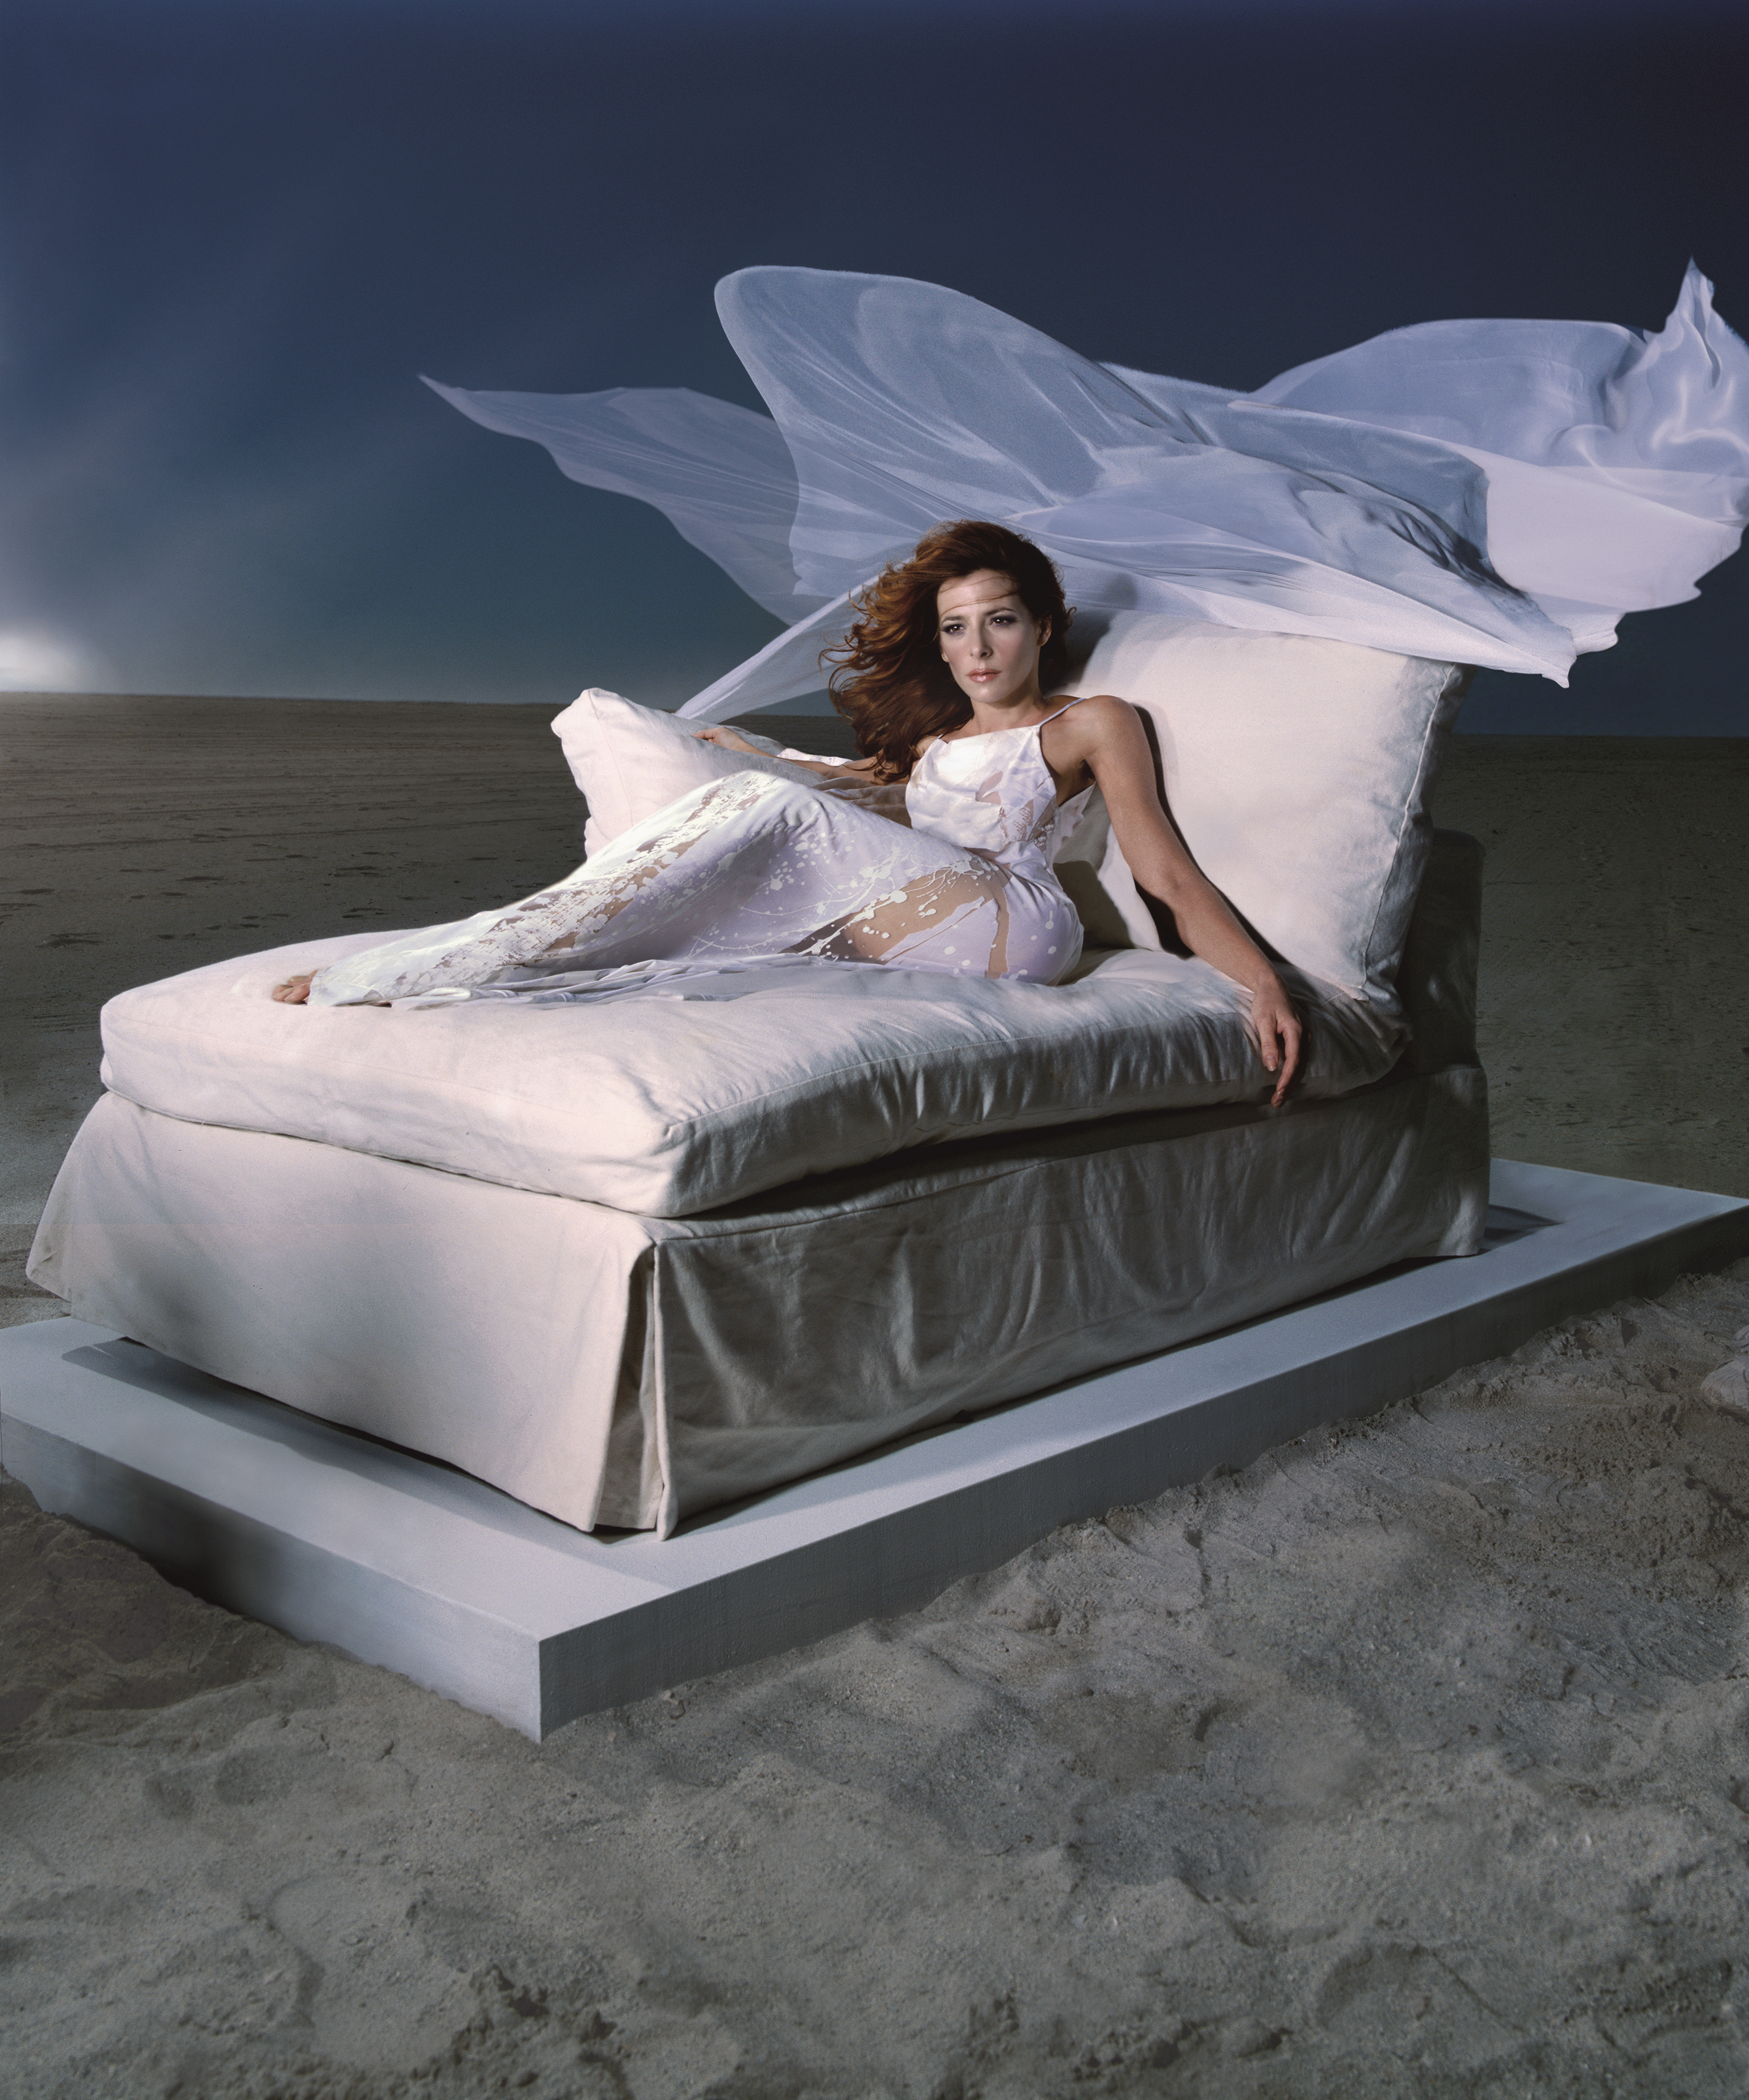 Mylene Farmer French Singer Redhead Clear Sky Bed Ripped Clothes 2674x3211